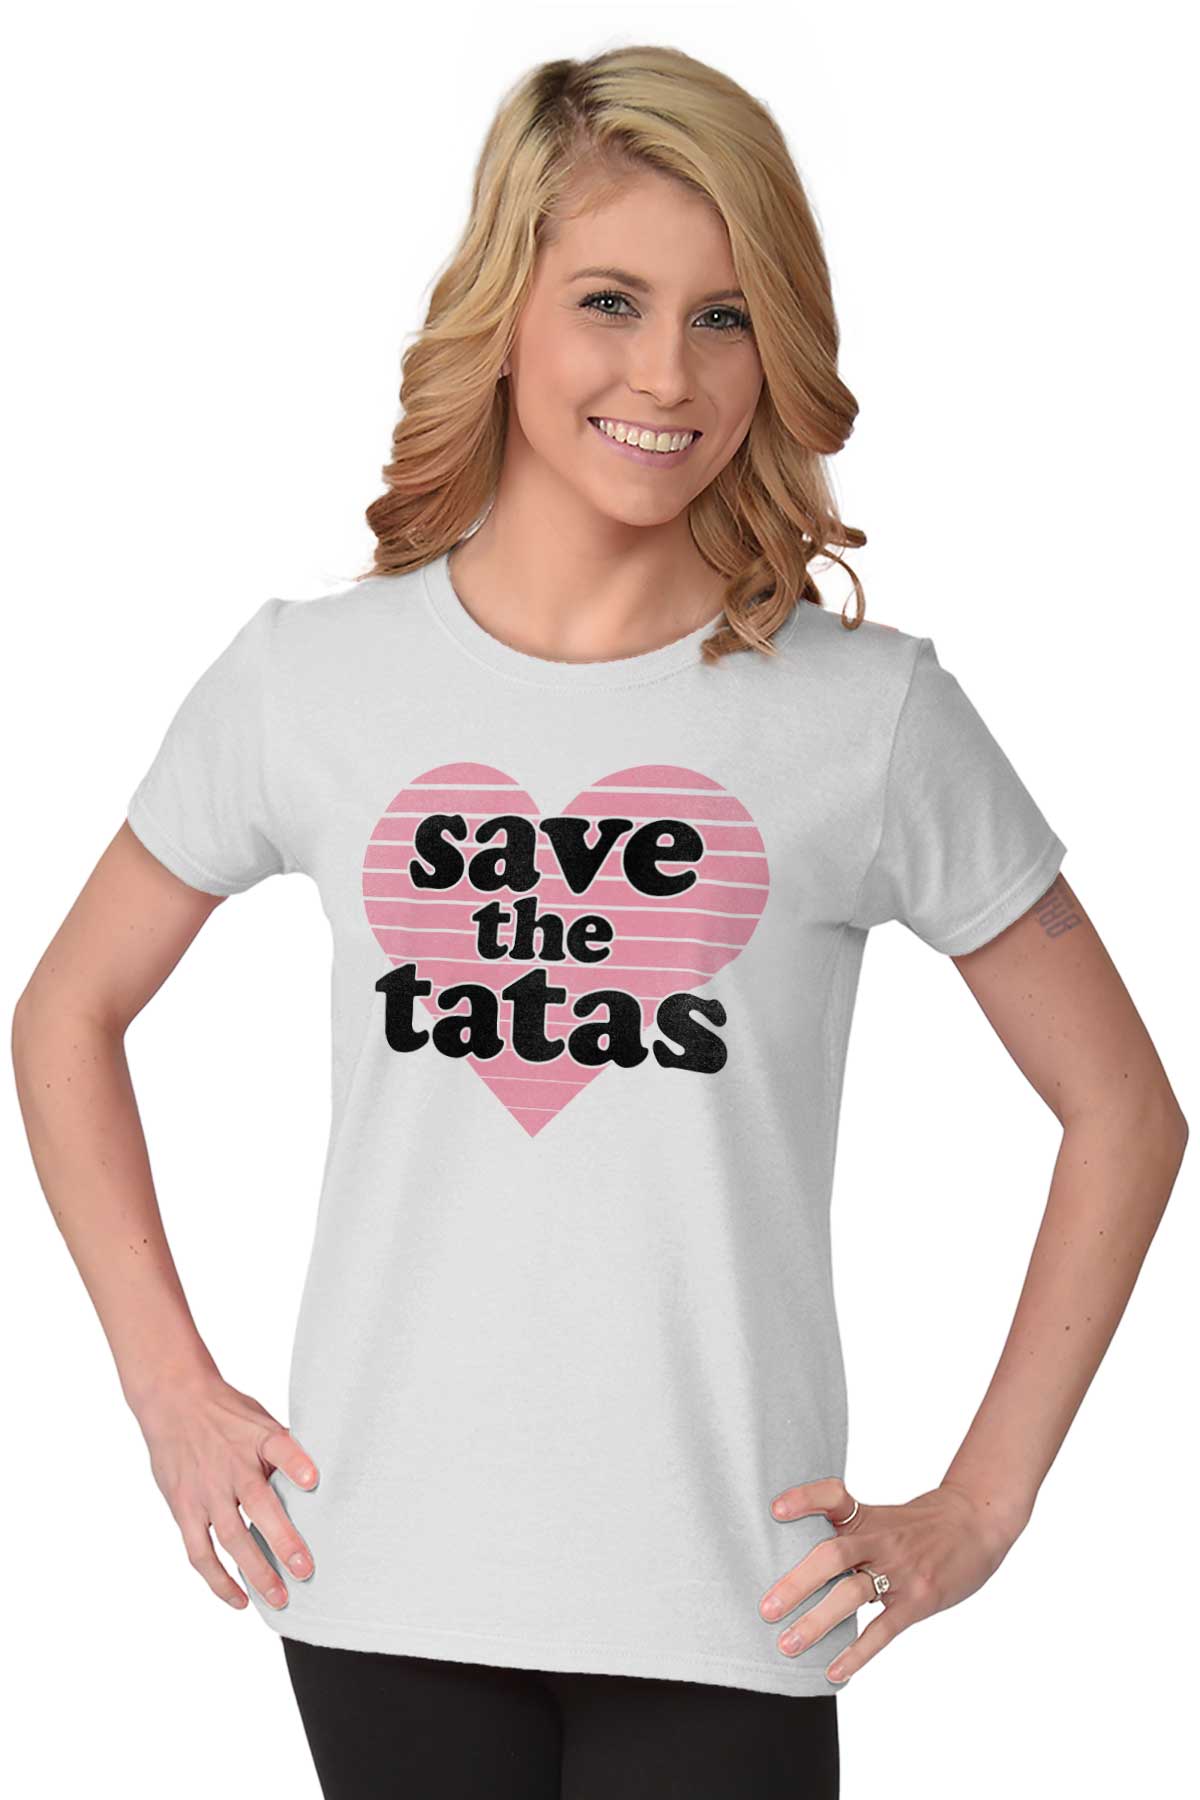 Save The Tatas Breast Cancer Awareness T Graphic T Shirts For Women 7312